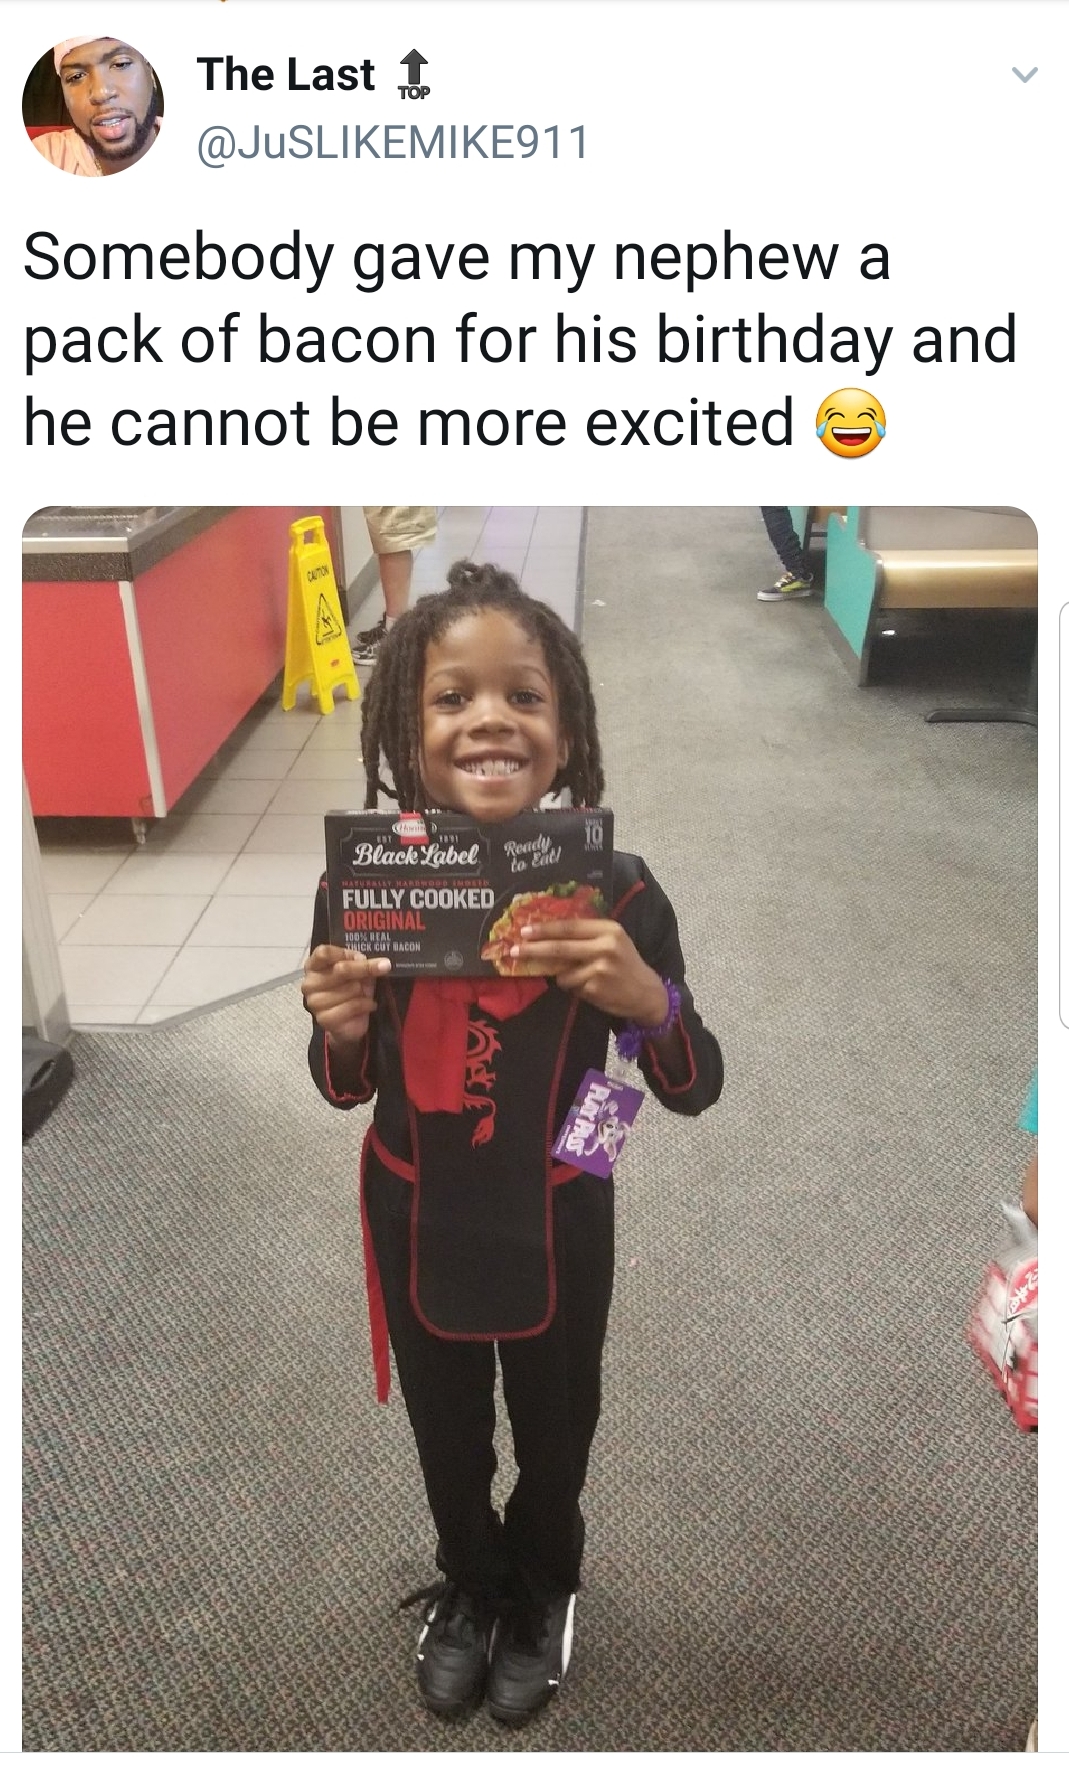 black twitter - The Last 1 Somebody gave my nephew a pack of bacon for his birthday and he cannot be more excited